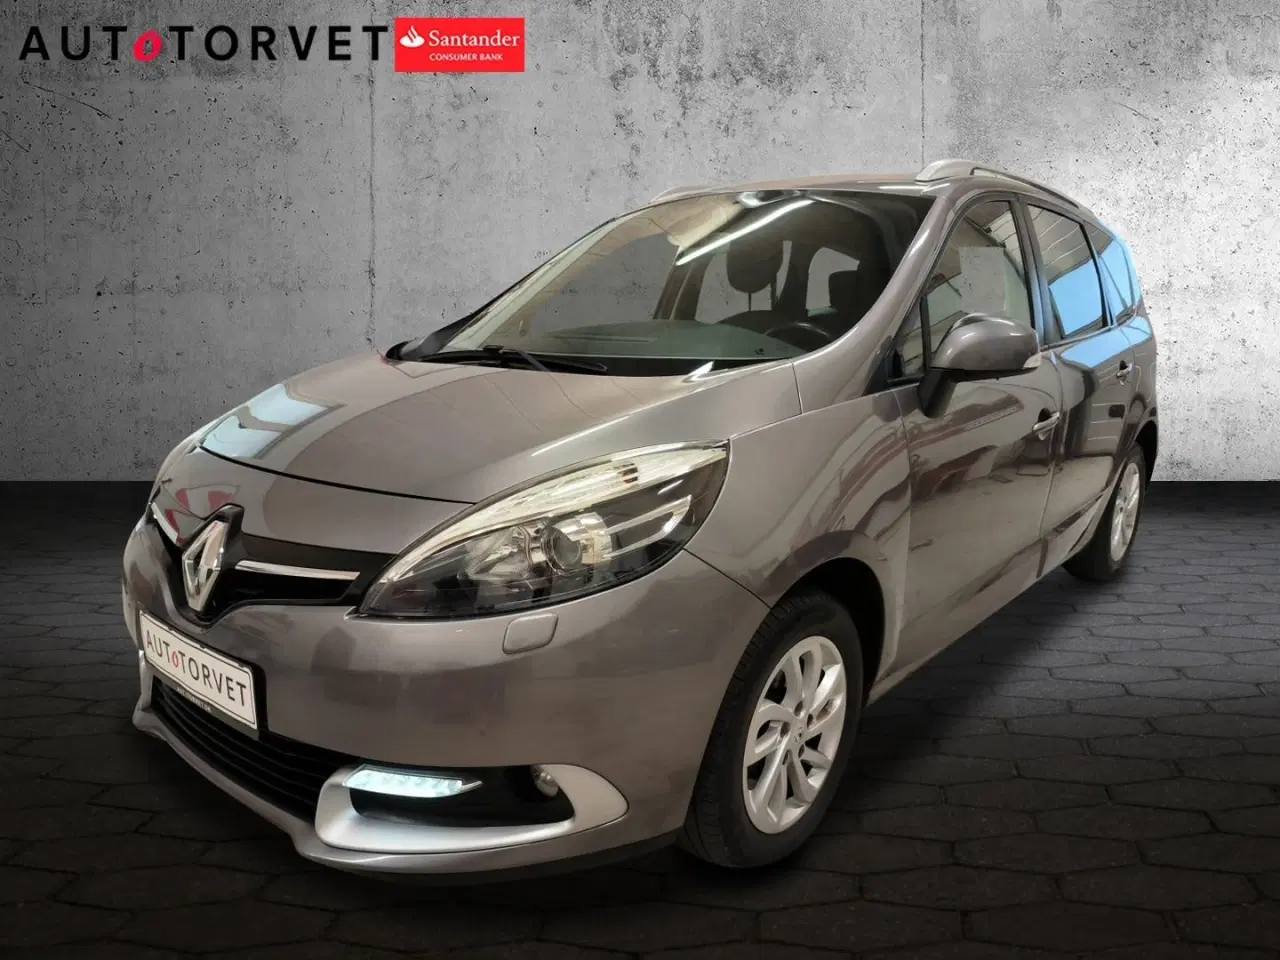 Billede 1 - Renault Grand Scenic III 1,5 dCi 110 Expression 7prs